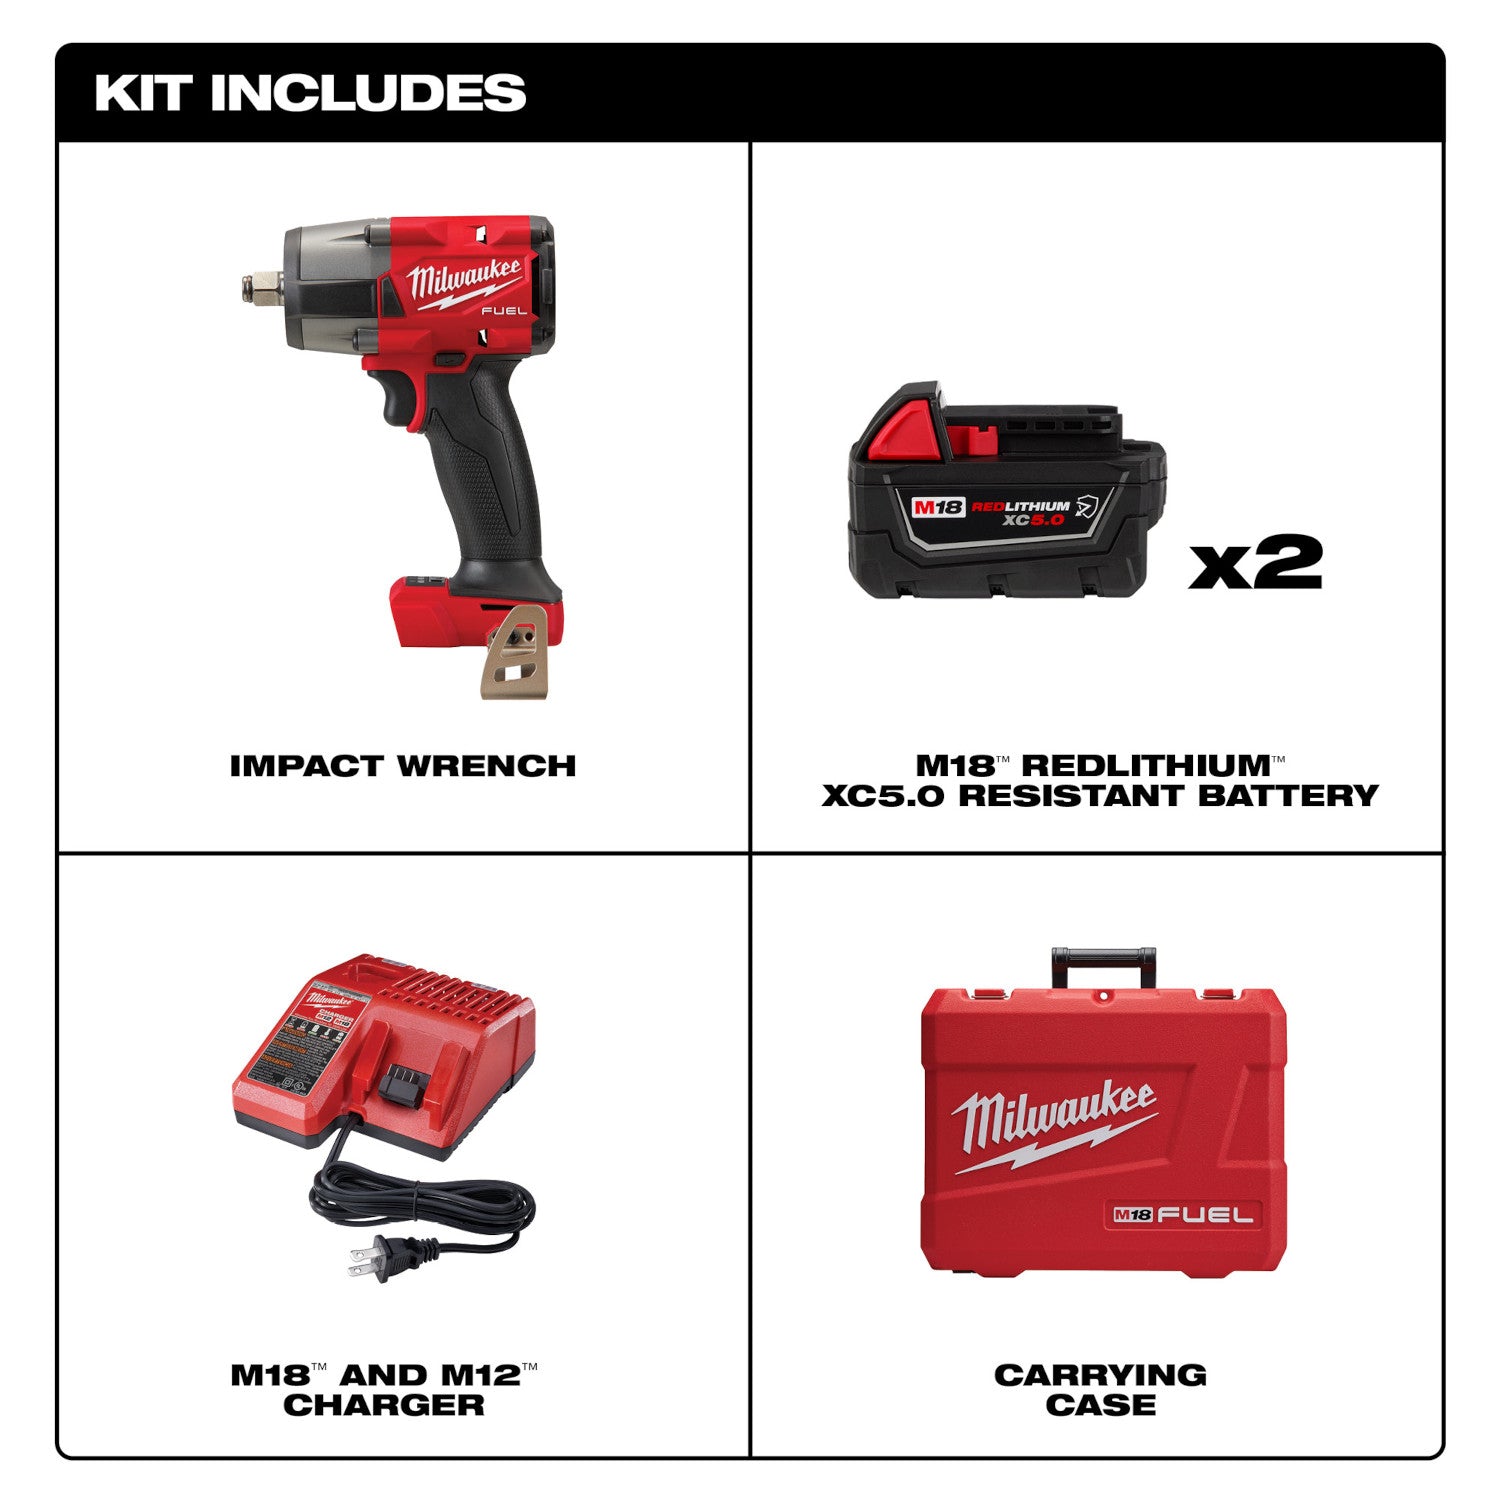 Milwaukee 2962-22R - M18 FUEL™ 1/2 " Compact Impact Wrench w/ Pin Detent Kit